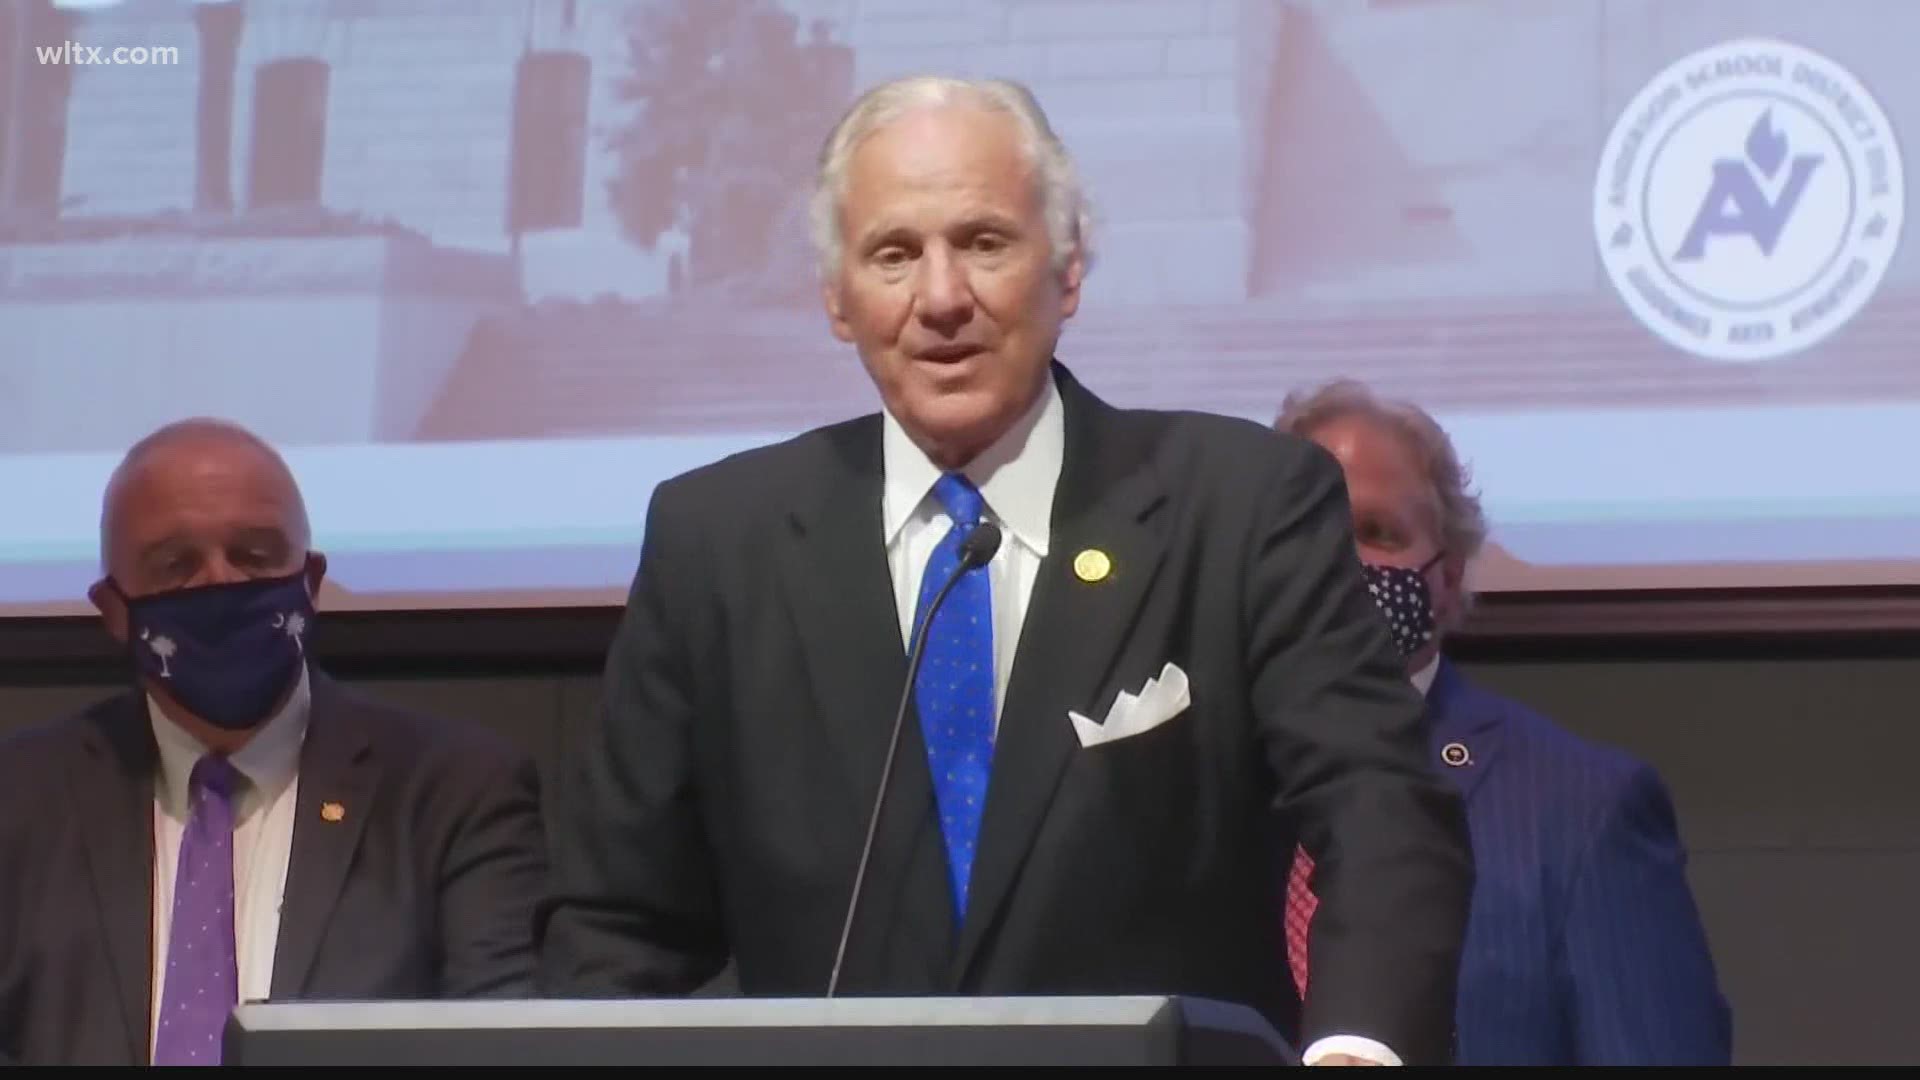 South Carolina Gov. Henry McMaster is asking for the state to come up with a way to allow visitors to come to nursing homes again.